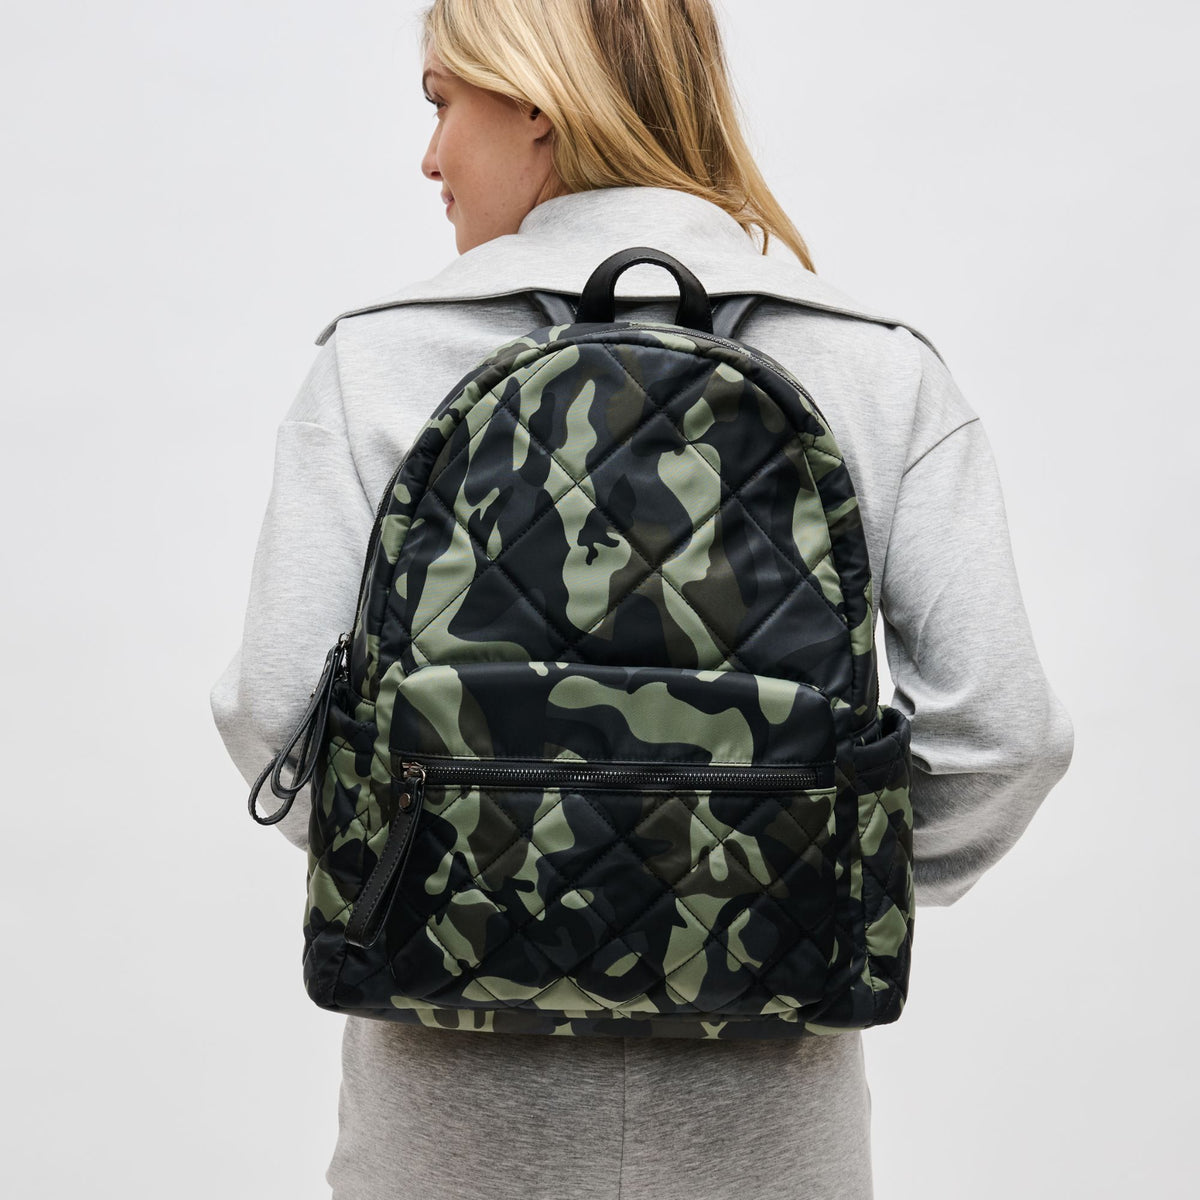 Woman wearing Camo Sol and Selene Motivator - Large Travel Backpack 841764106580 View 1 | Camo